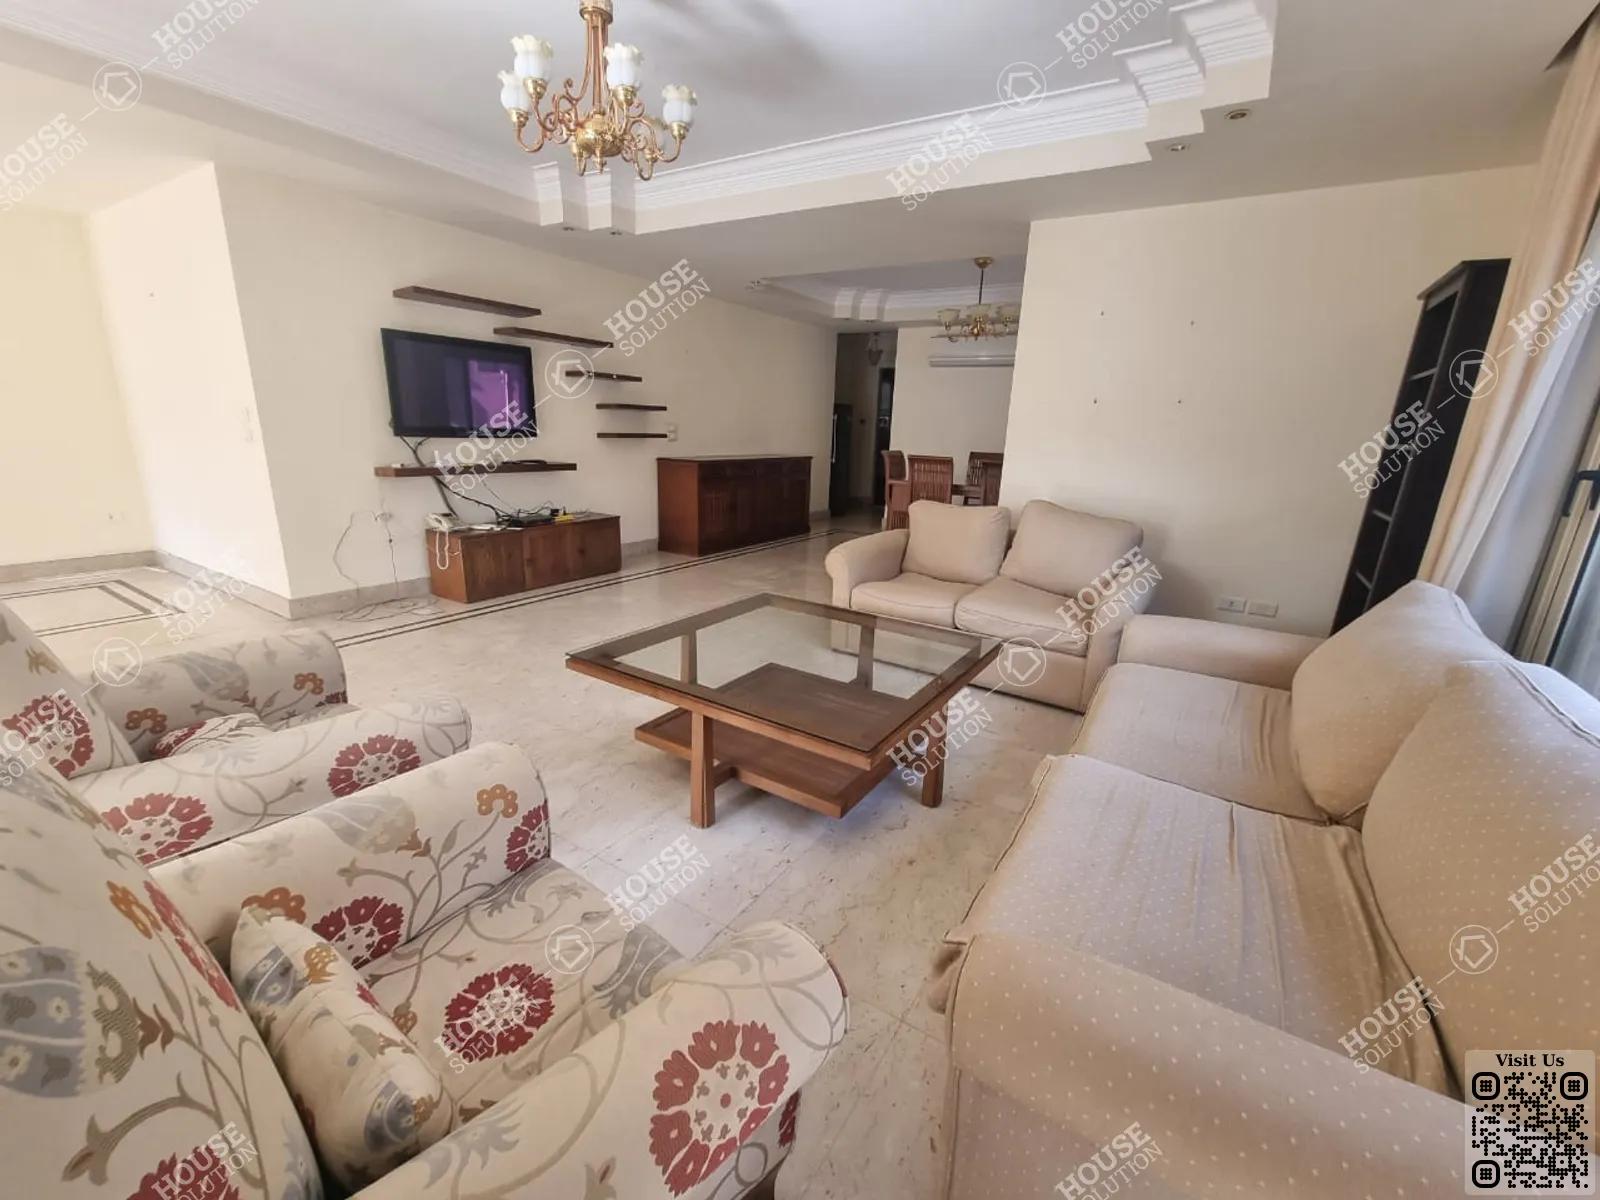 RECEPTION  @ Apartments For Rent In Maadi Maadi Degla Area: 235 m² consists of 4 Bedrooms 4 Bathrooms Modern furnished 5 stars #5625-2